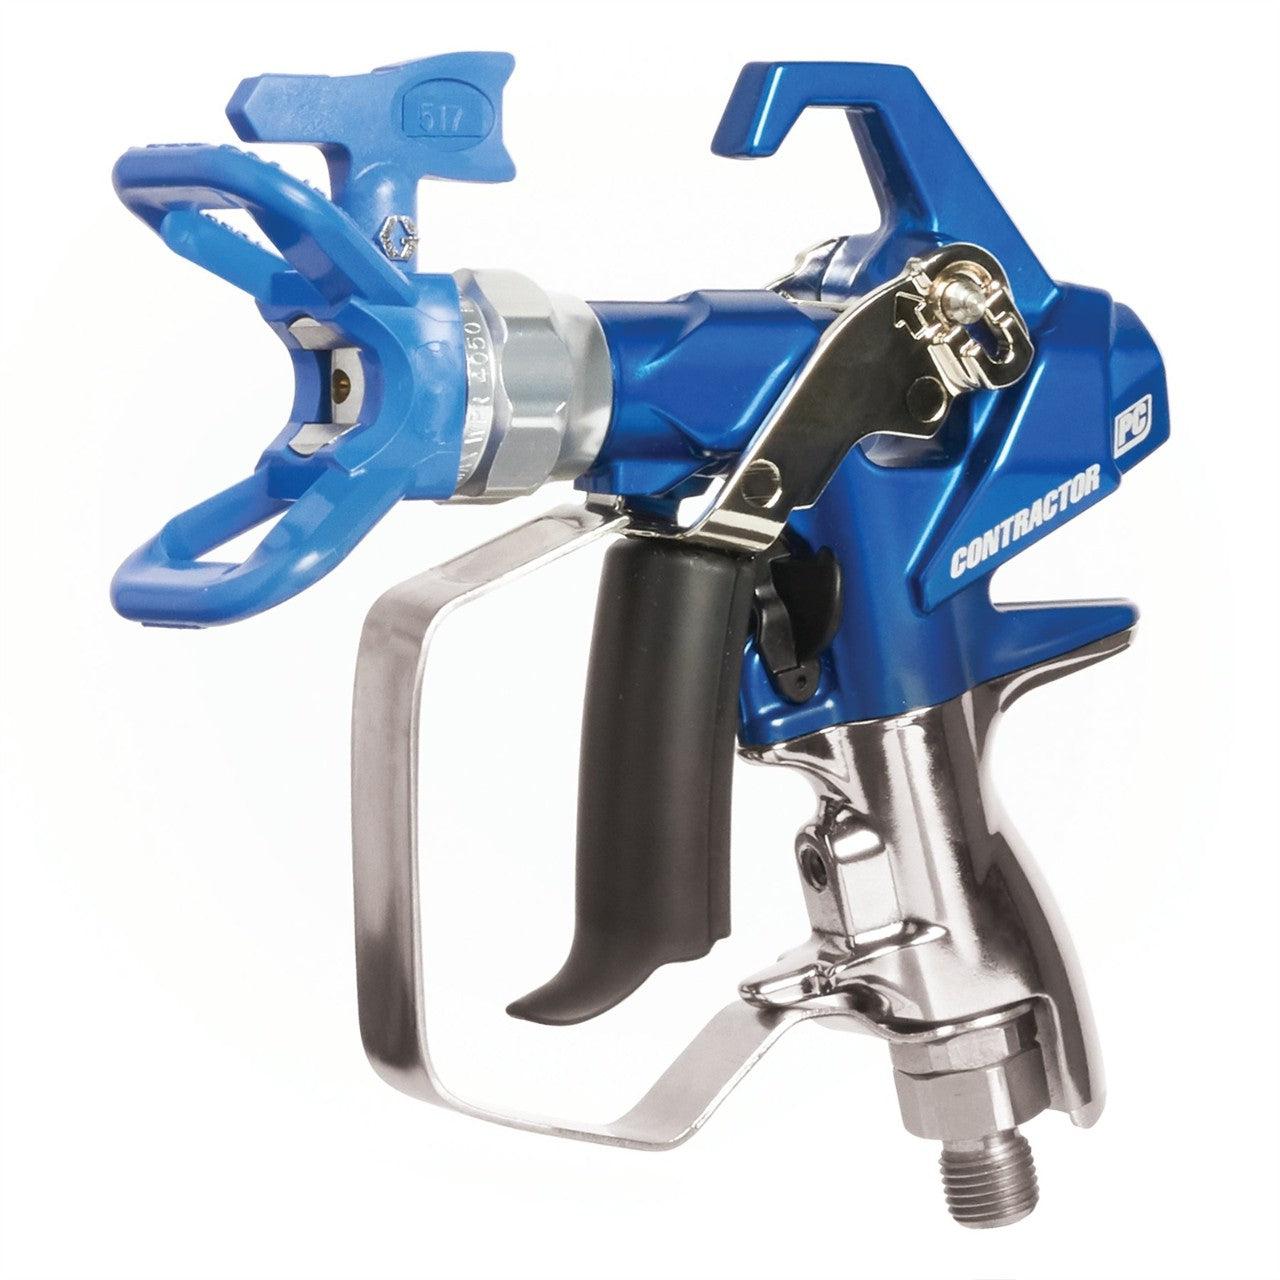 Contractor PC Compact Airless Spray Gun with RAC X 517 SwitchTip